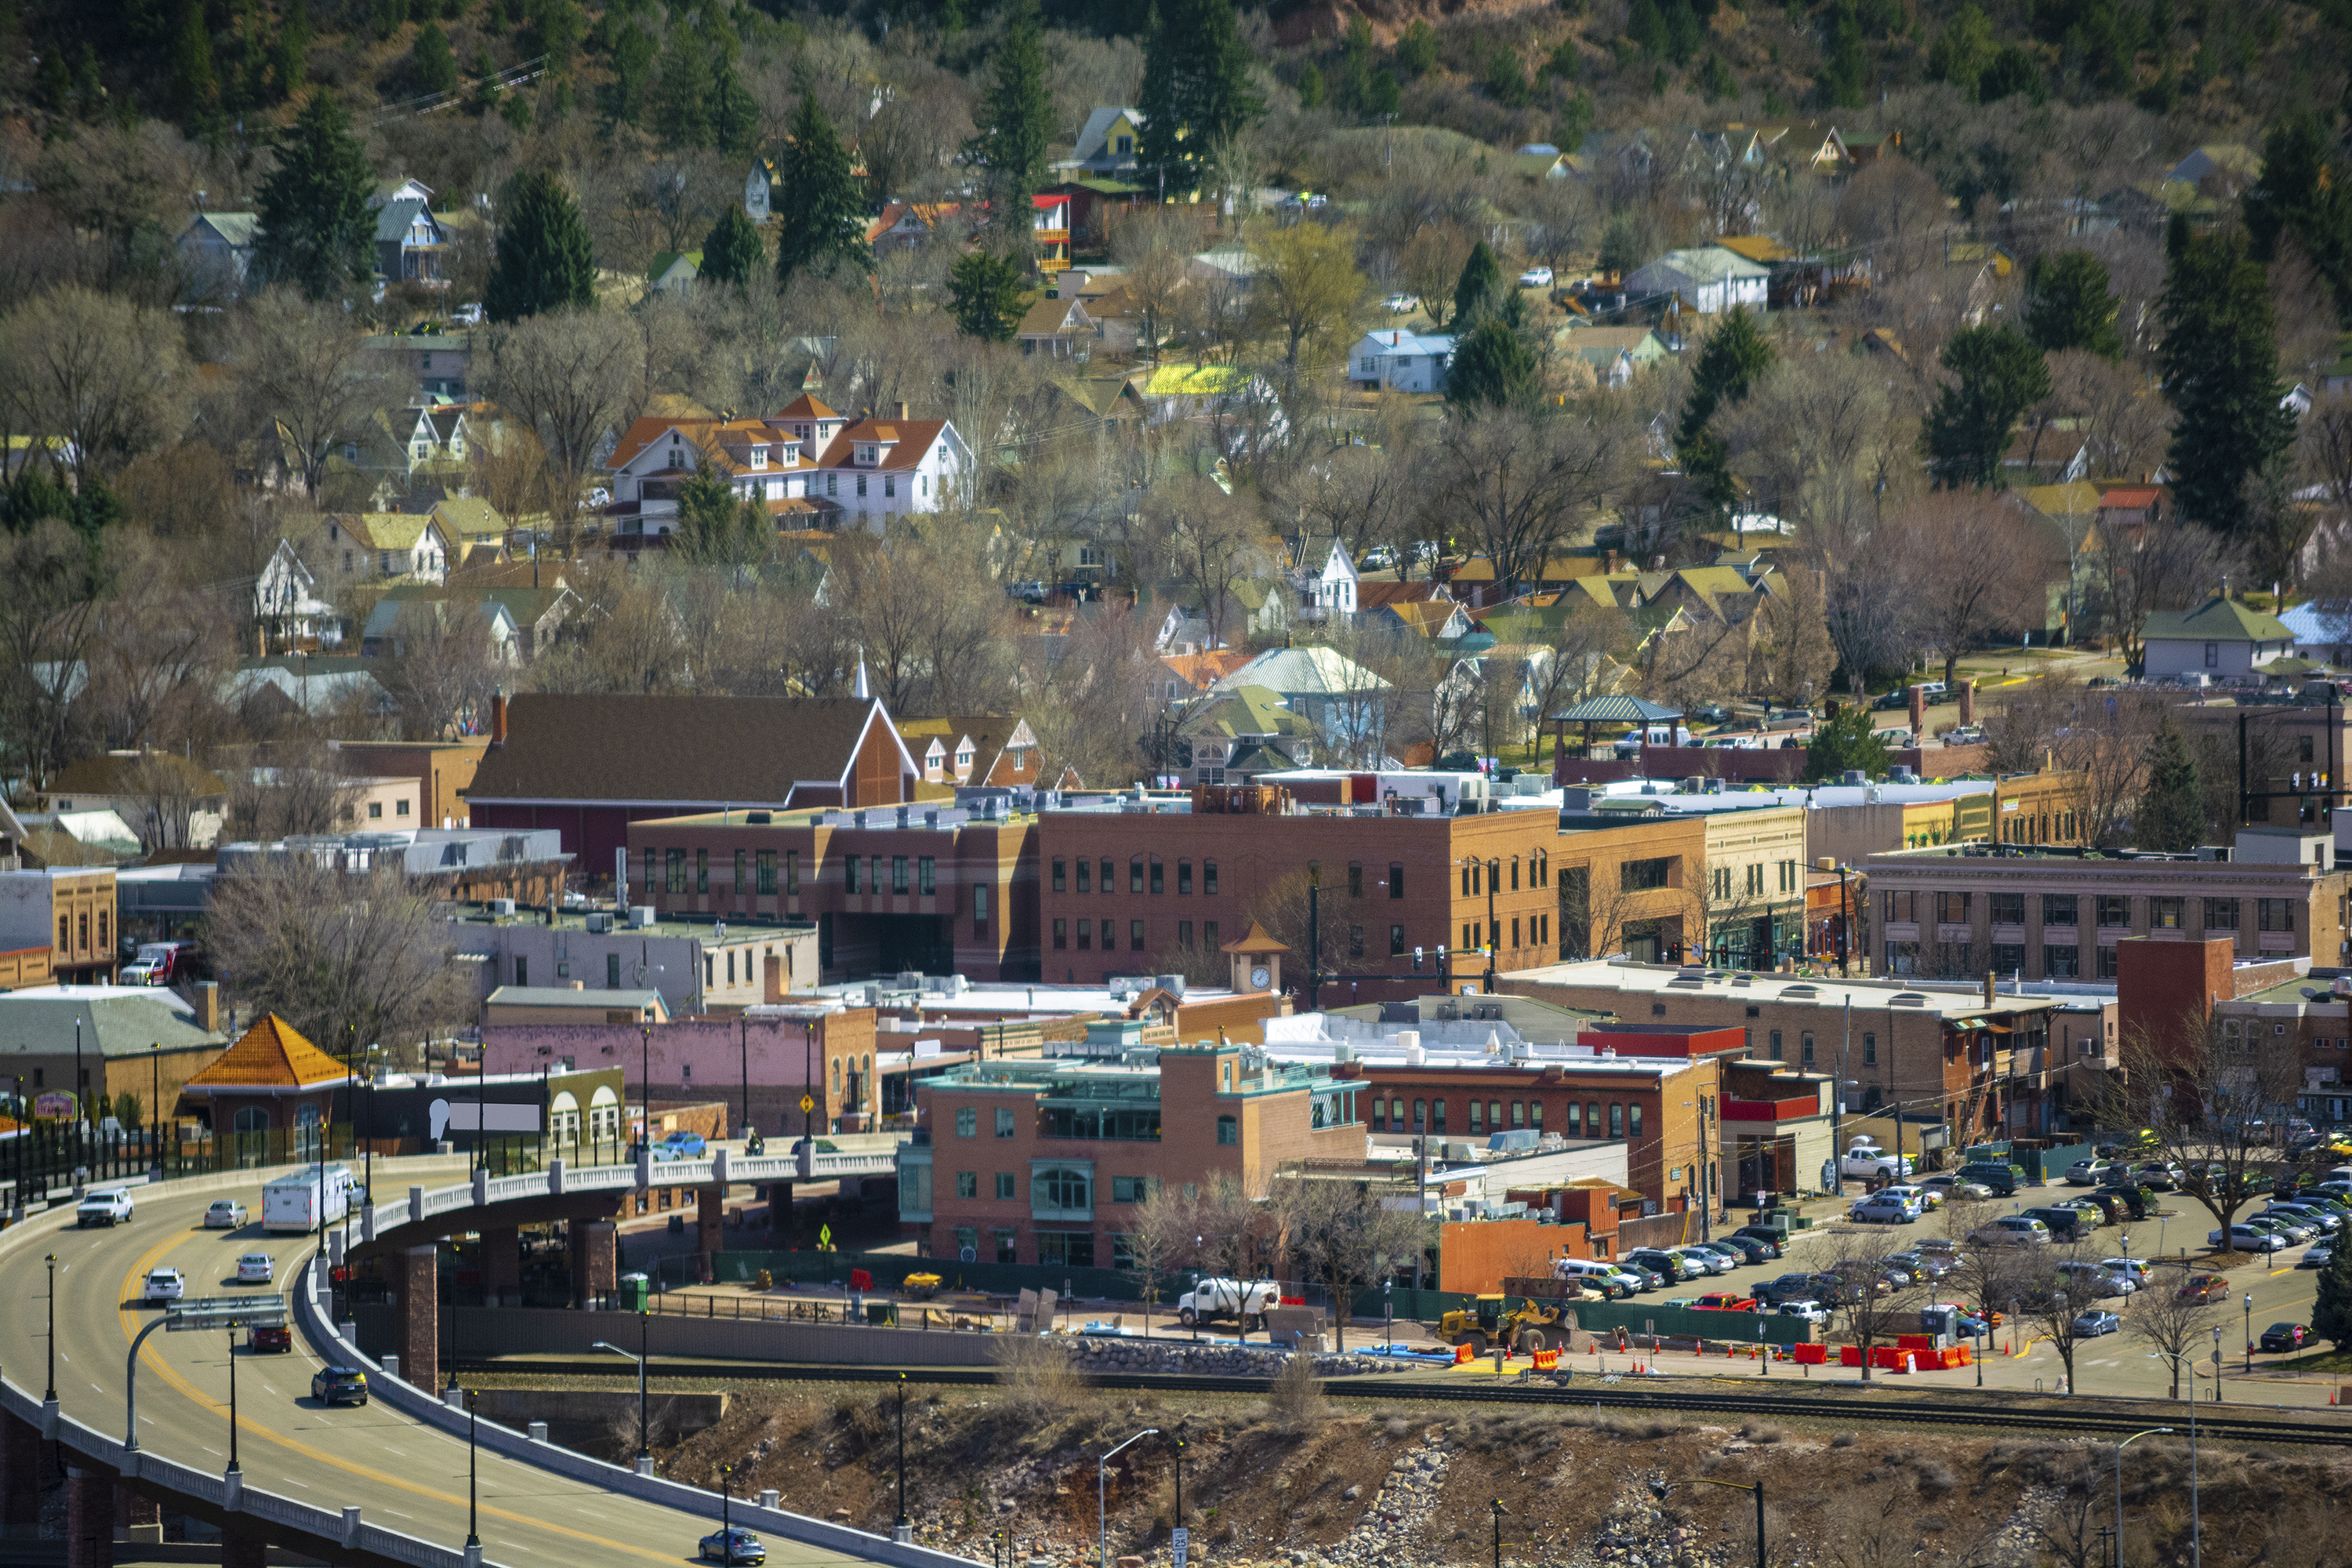 Downtown Glenwood Springs, Colorado on a Sunny Day